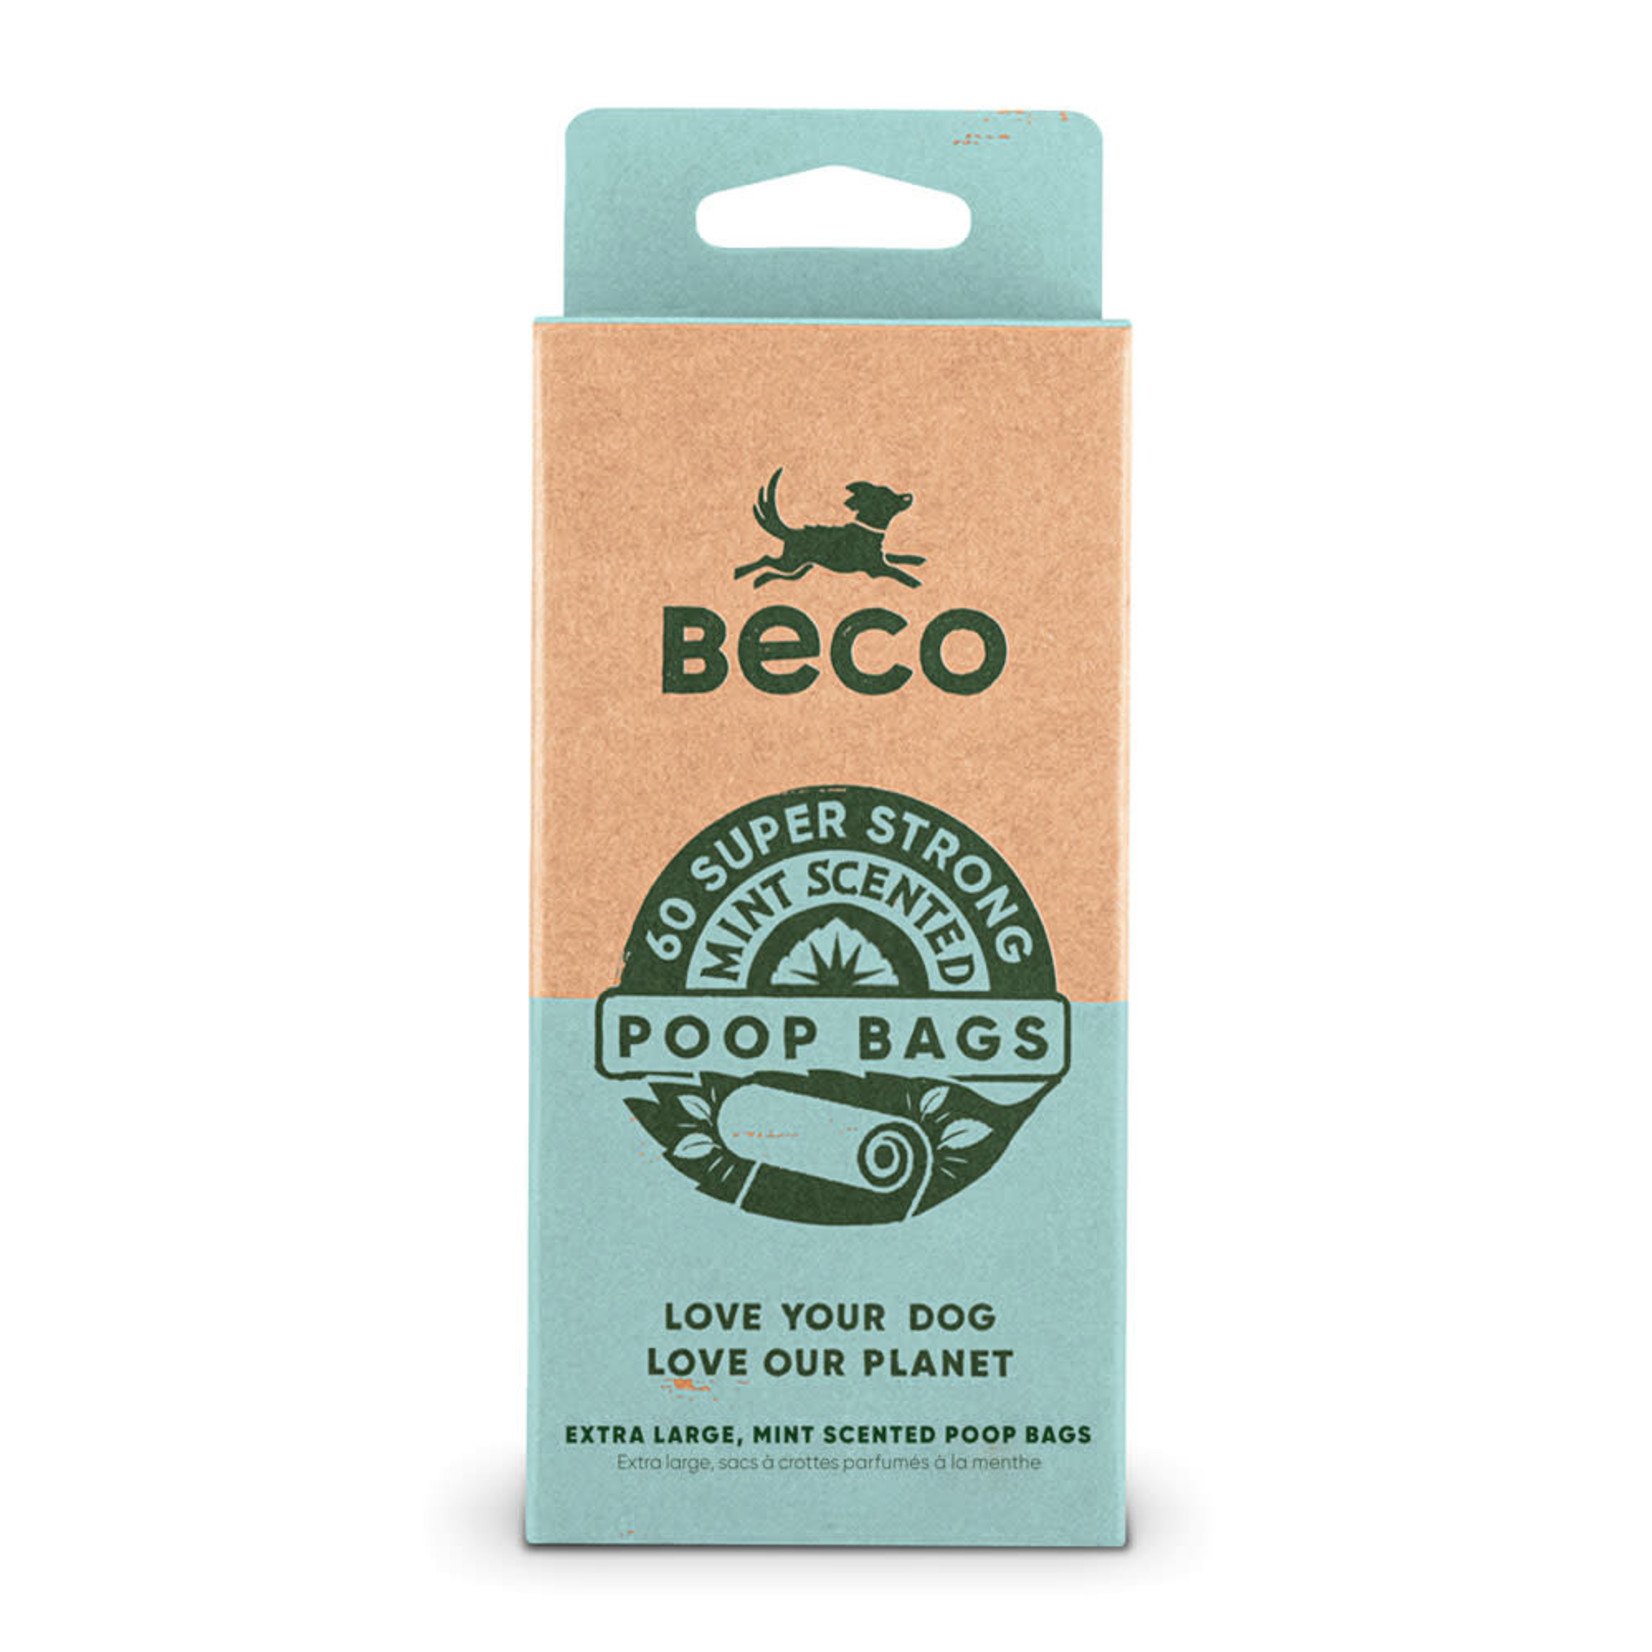 Beco Eco-Friendly Mint Scented Degradable Poop Bags 60 bags, 4 rolls of 15